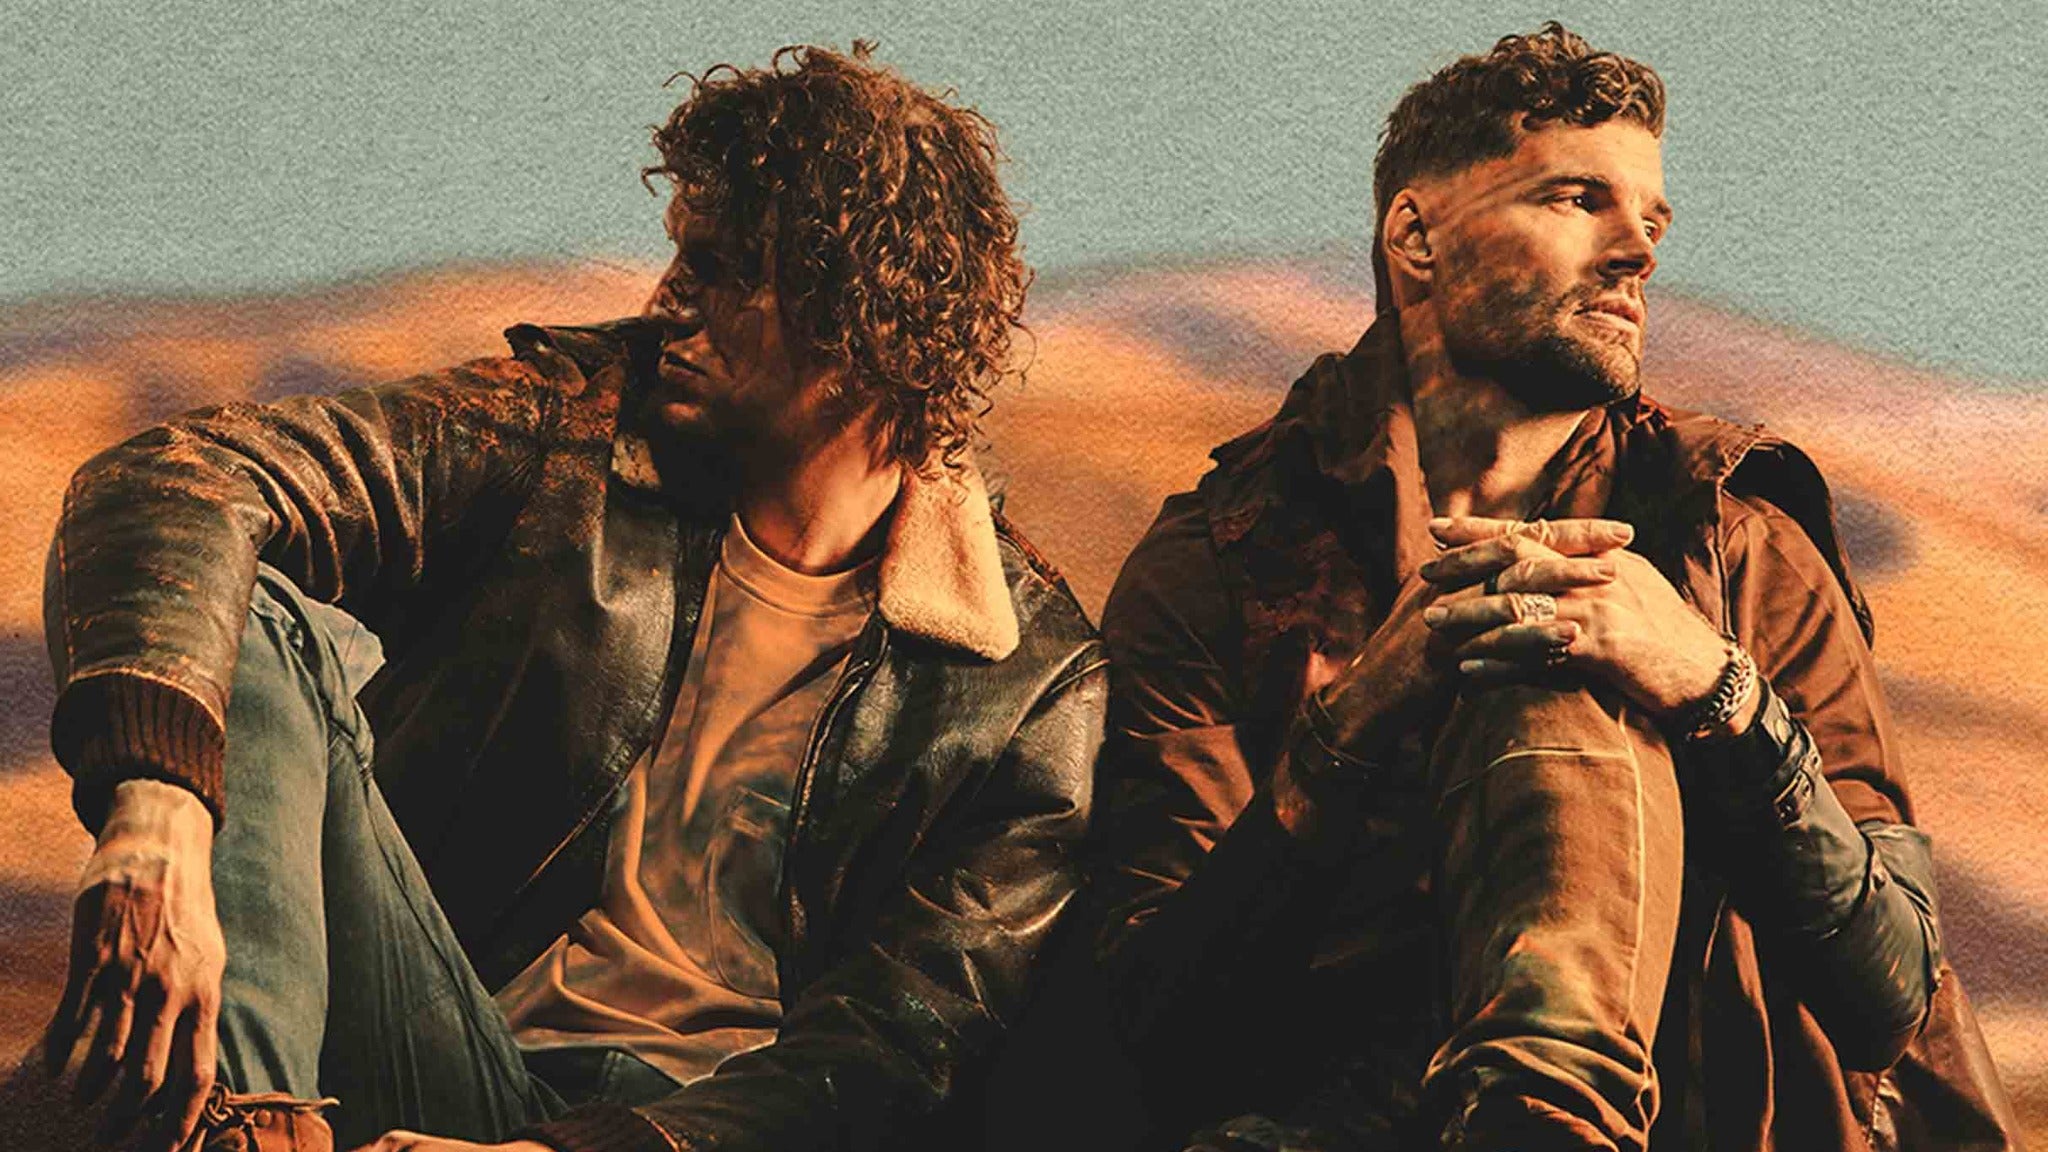 For King & Country at T-Mobile Center - Kansas City, MO 64106